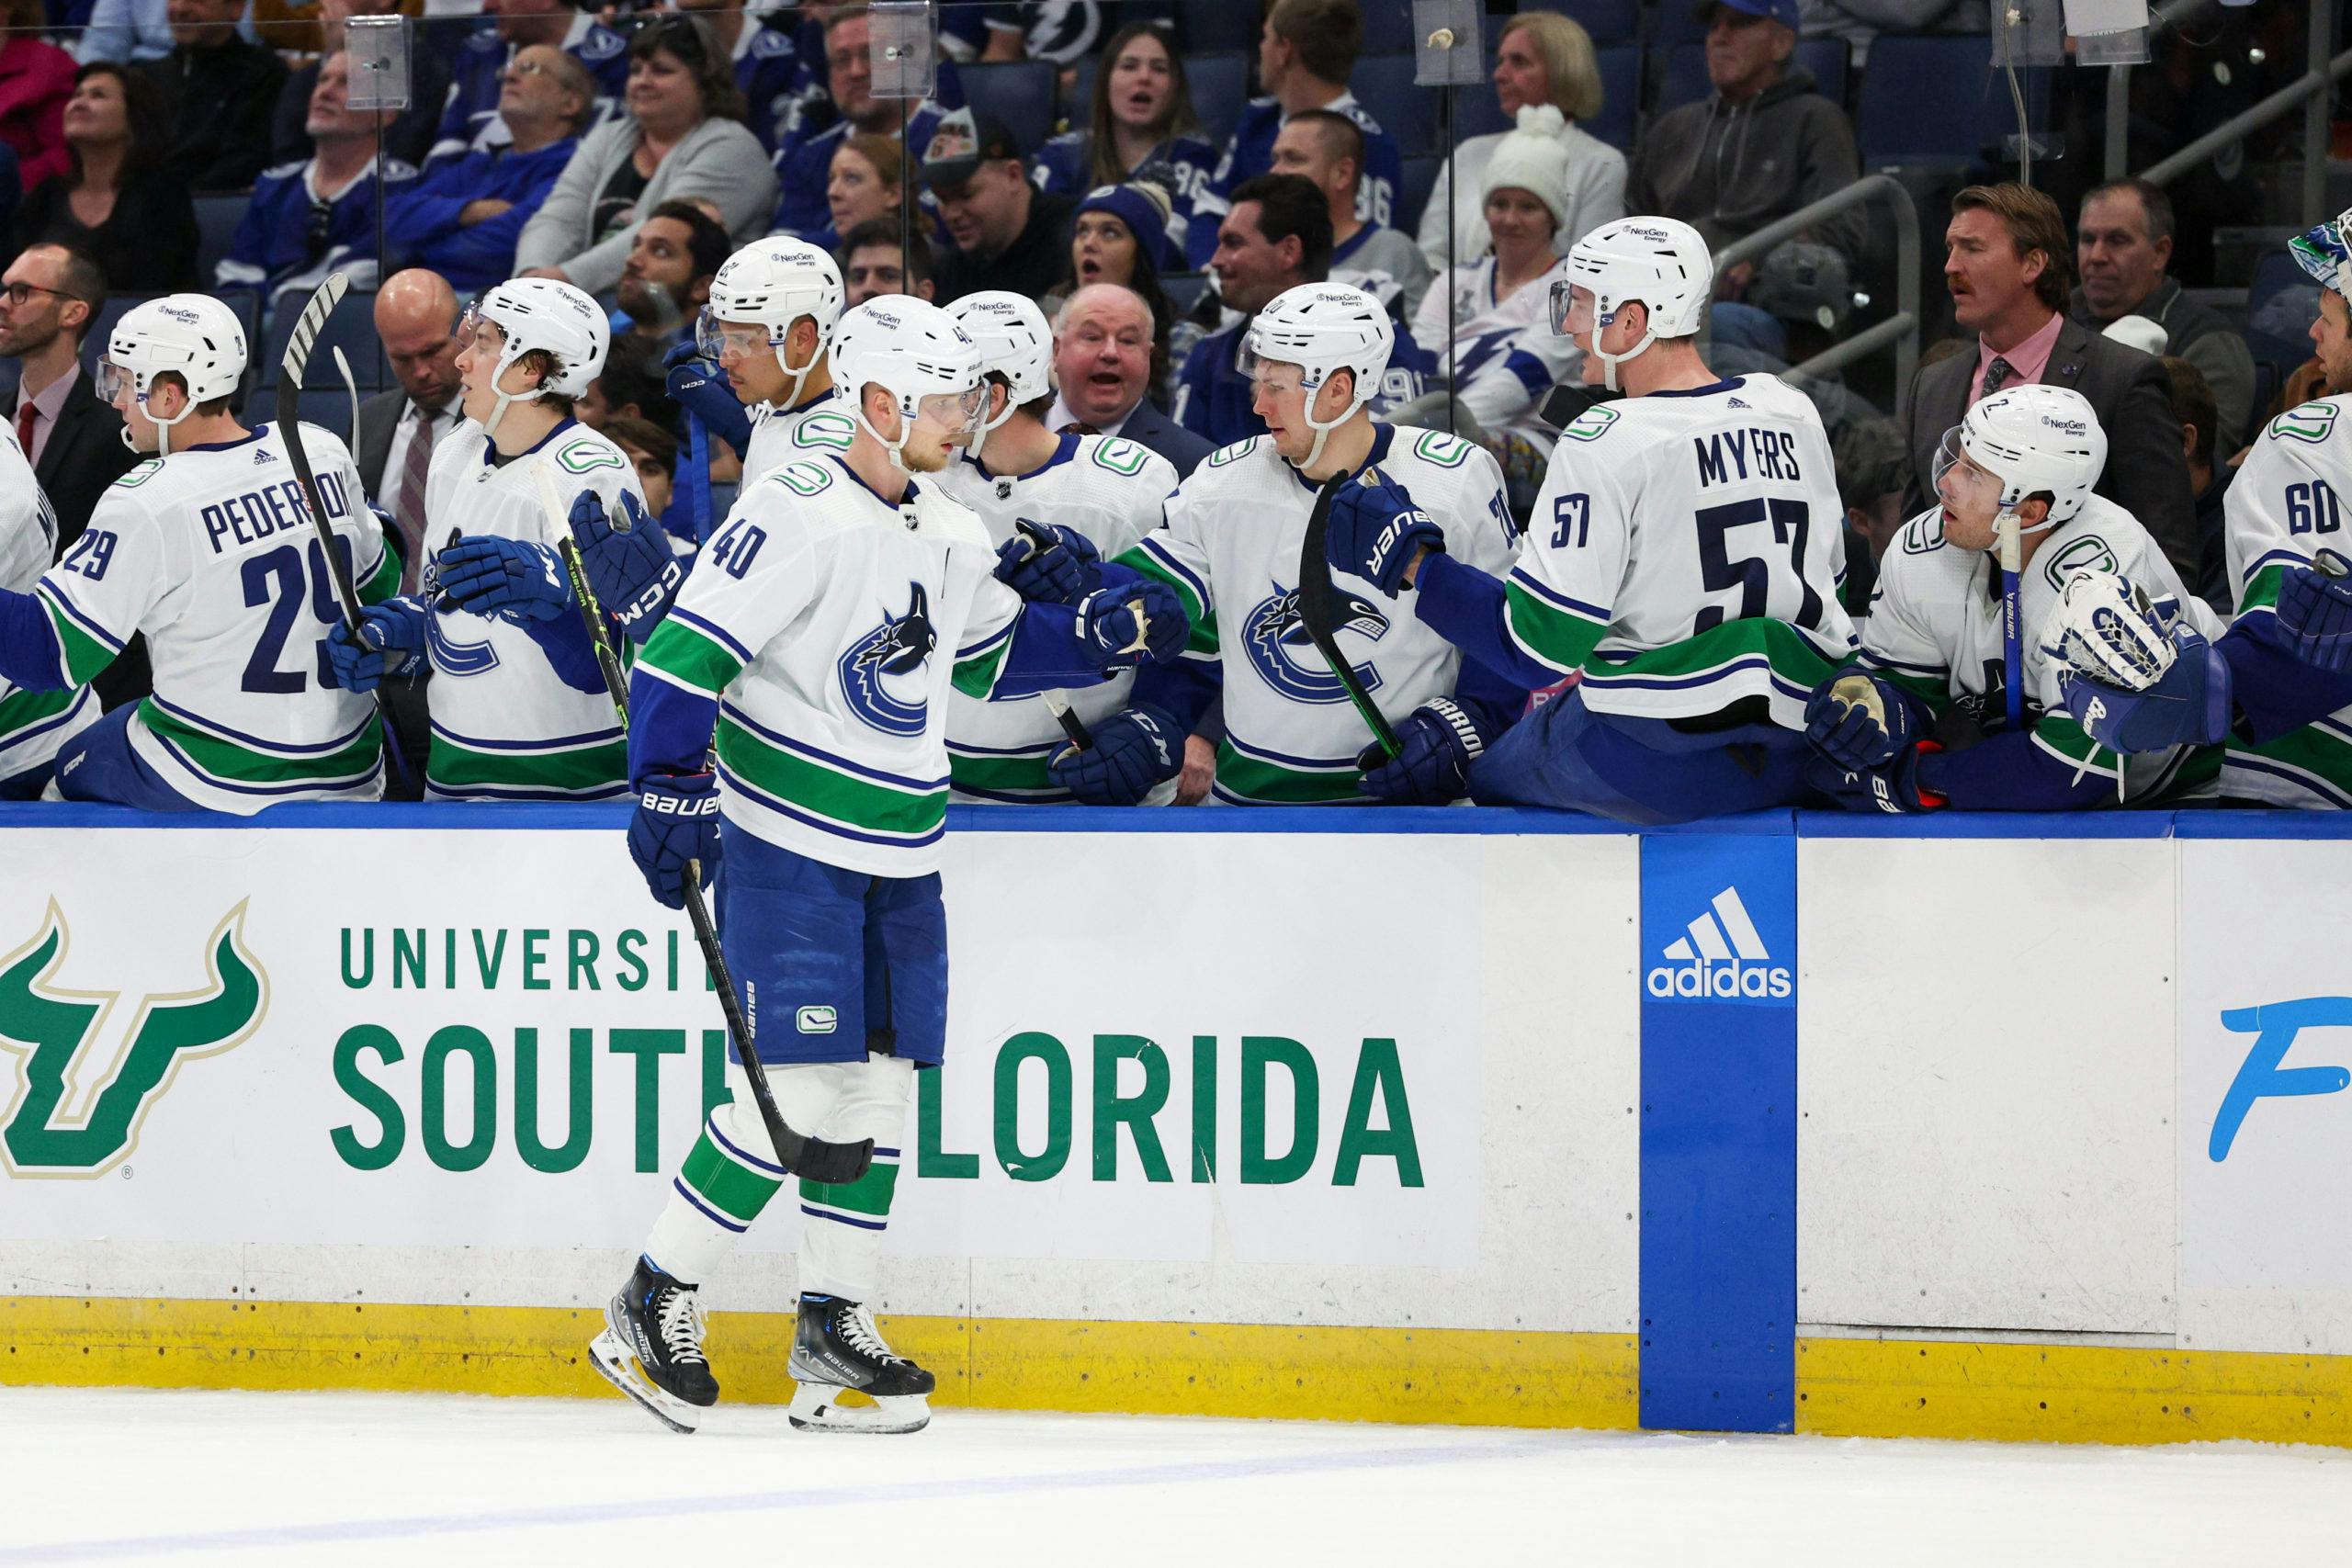 Pettersson lifts Canucks to 4-3 win over Predators in SO